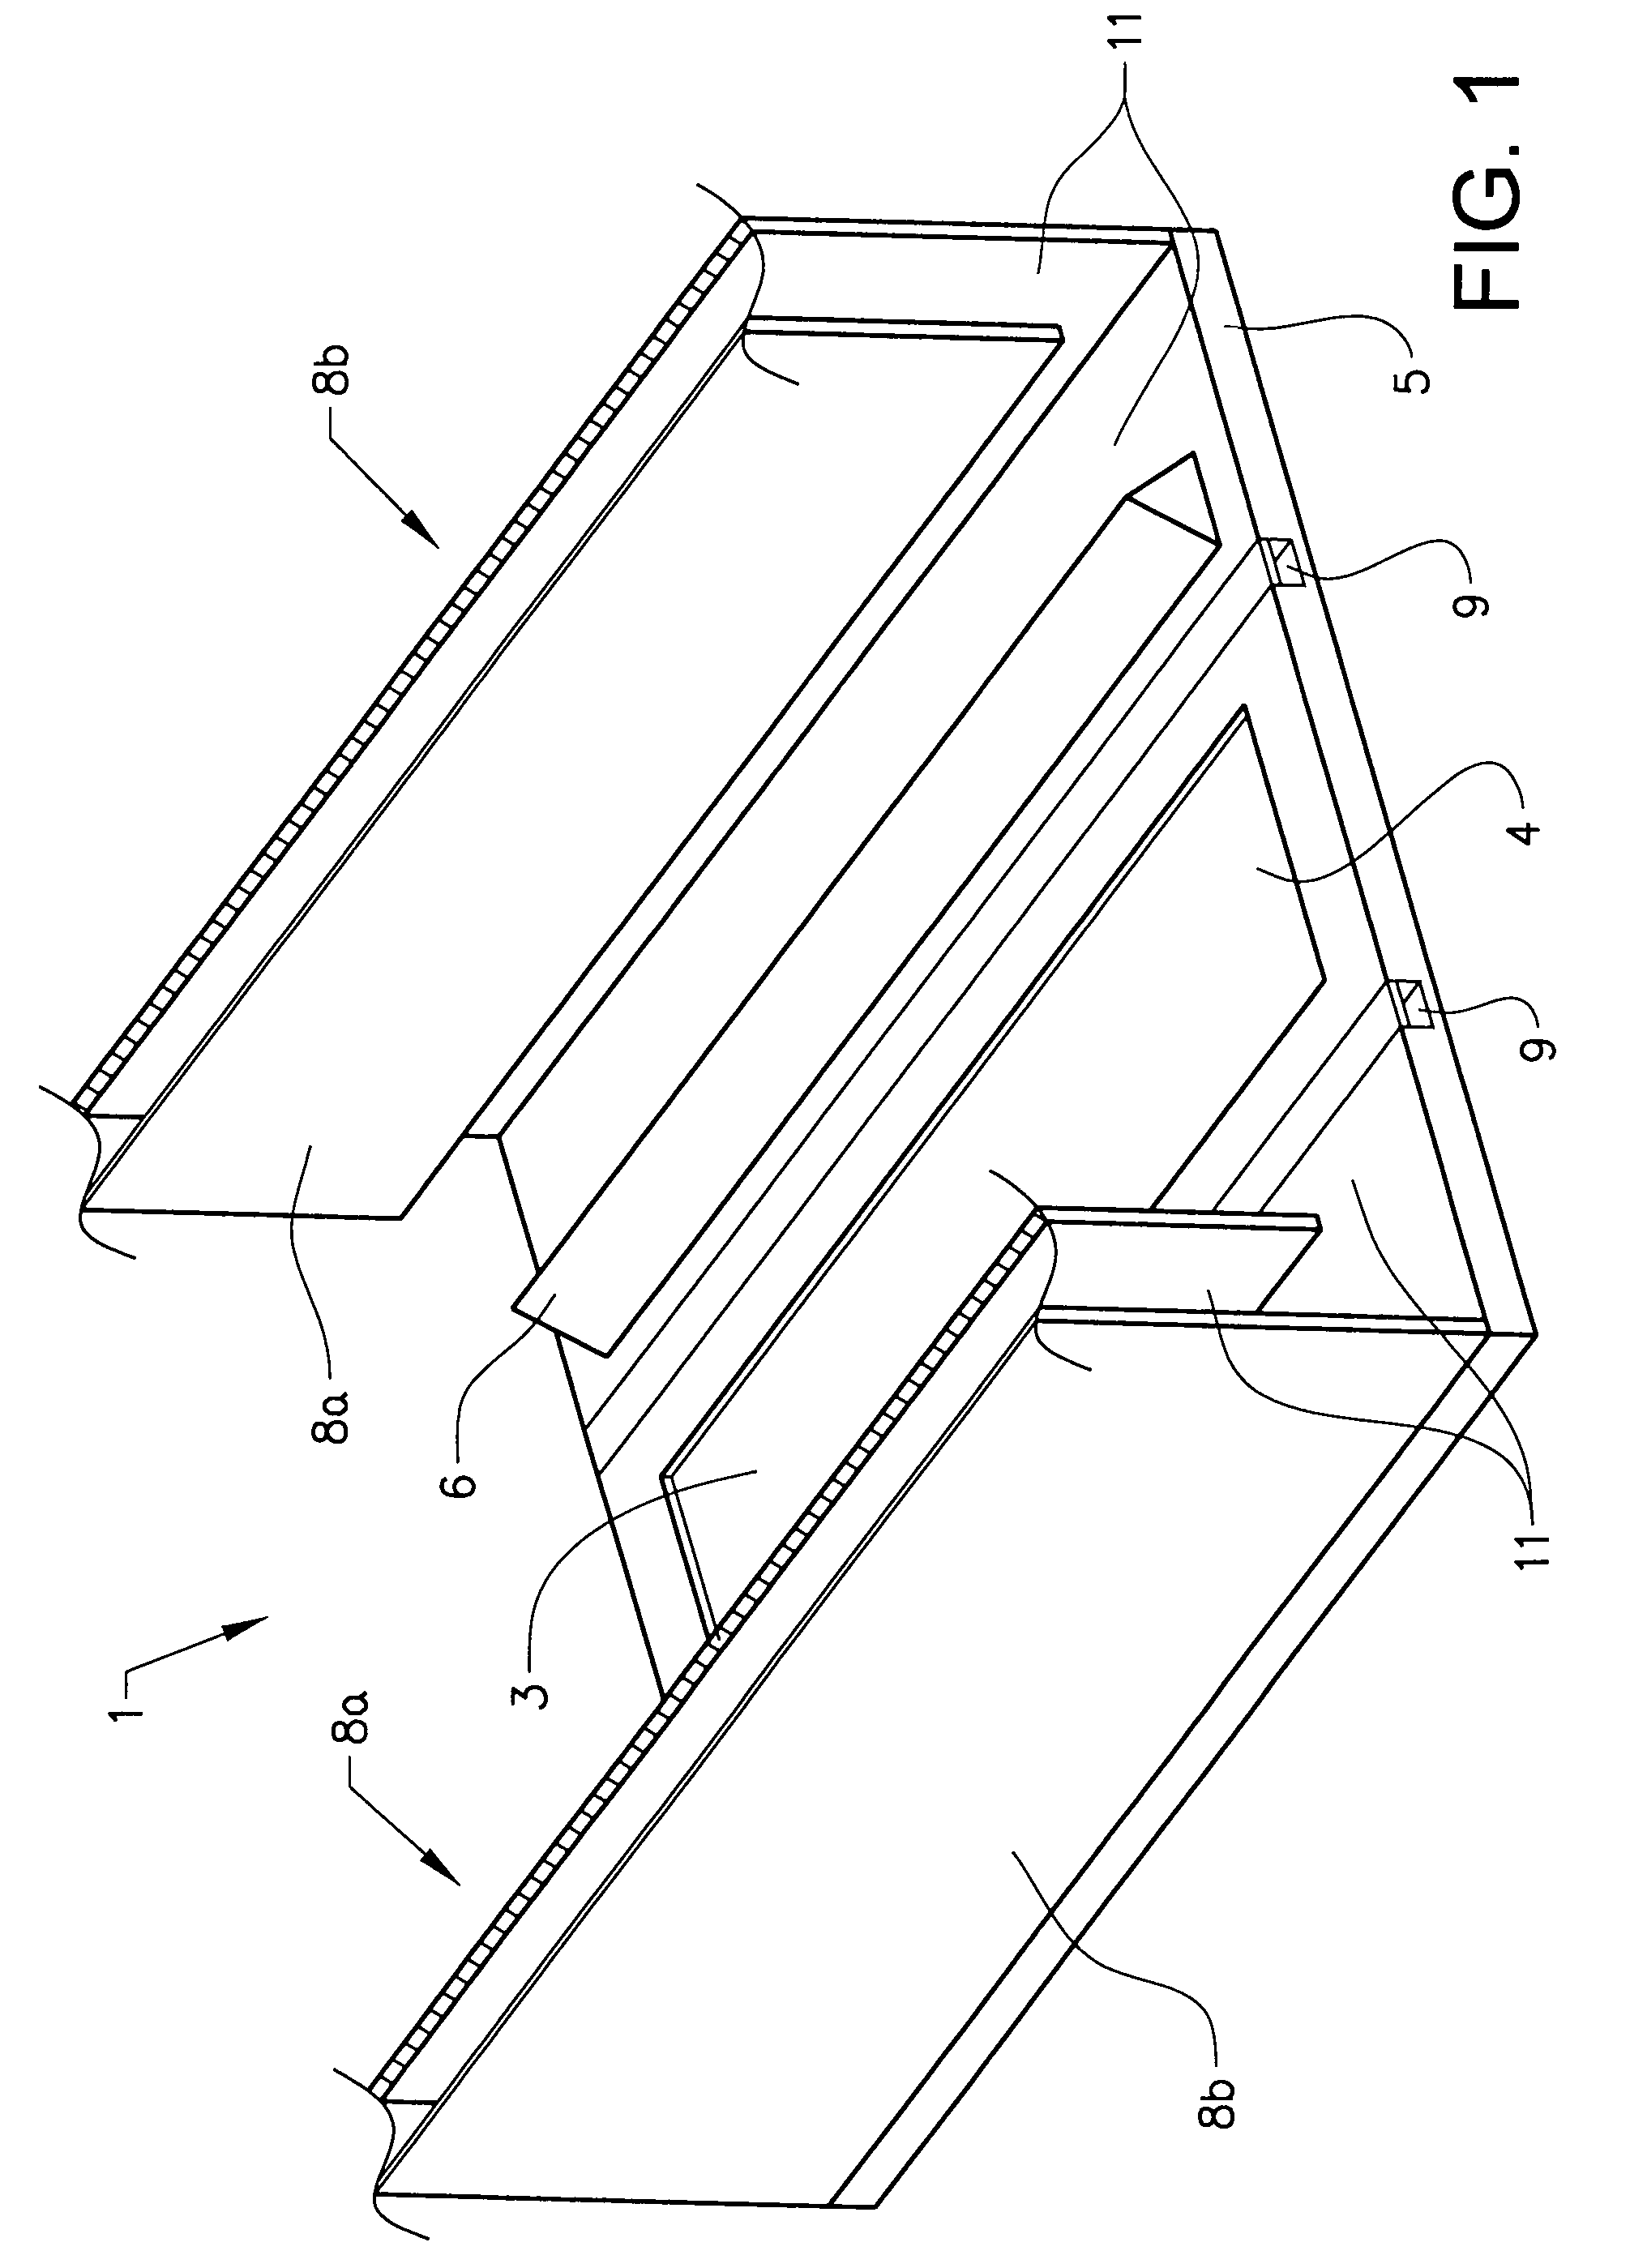 Systems, apparatus, and methods to feed and distribute powder used to produce three-dimensional objects